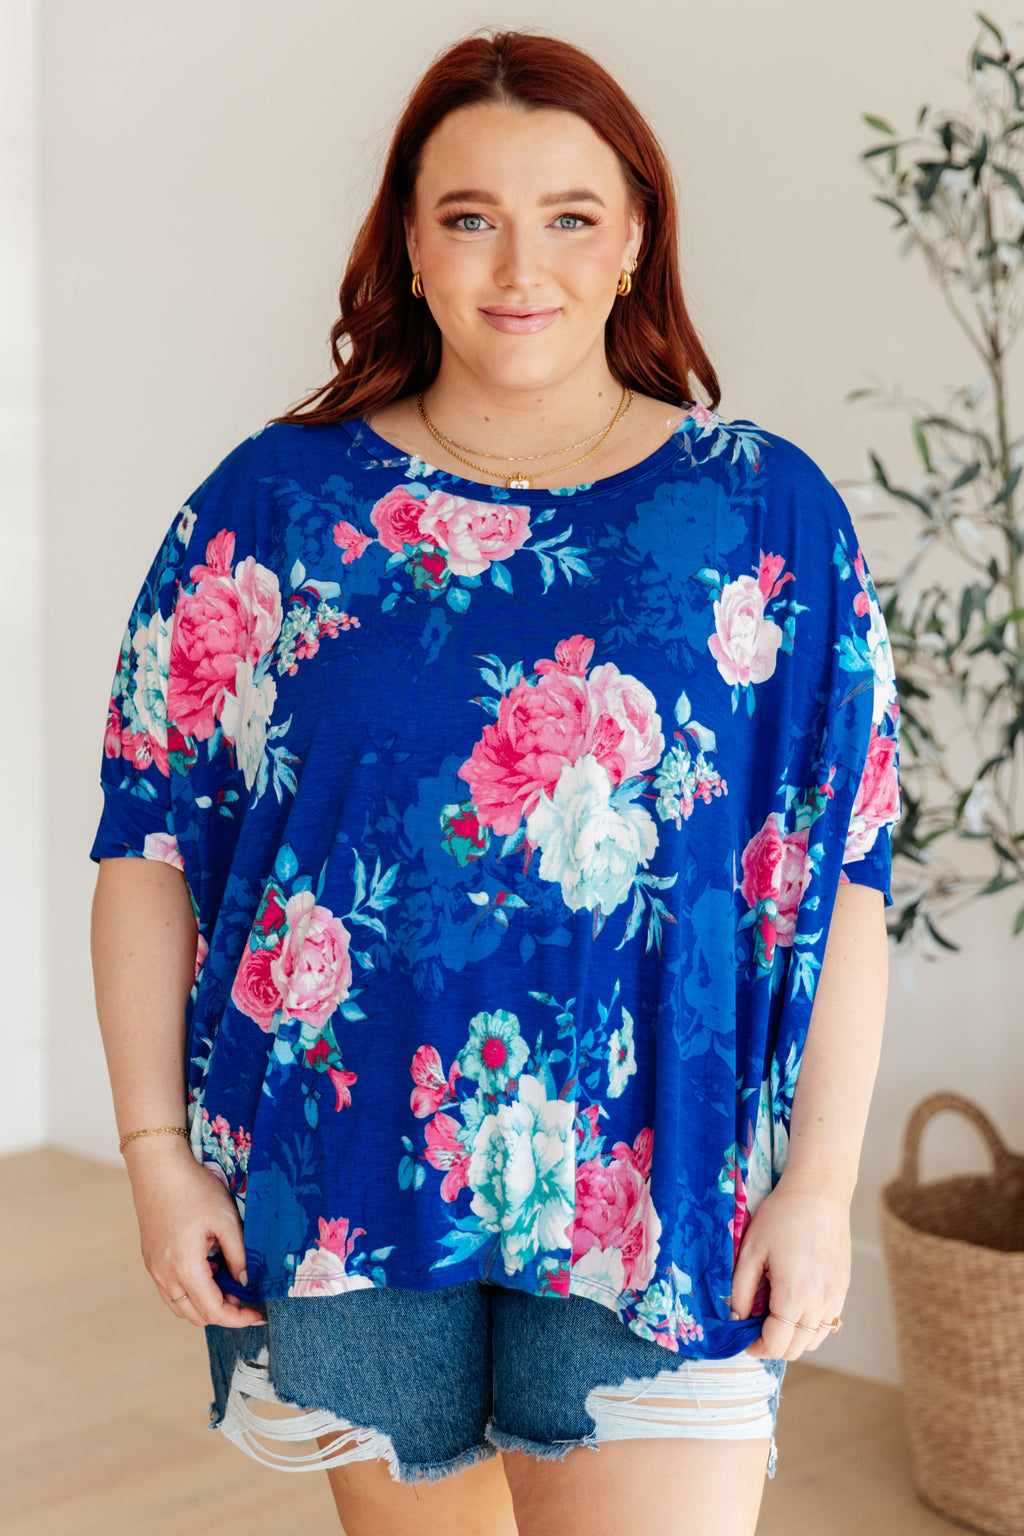 Hazel Blues® |  Essential Blouse in Royal and Pink Floral